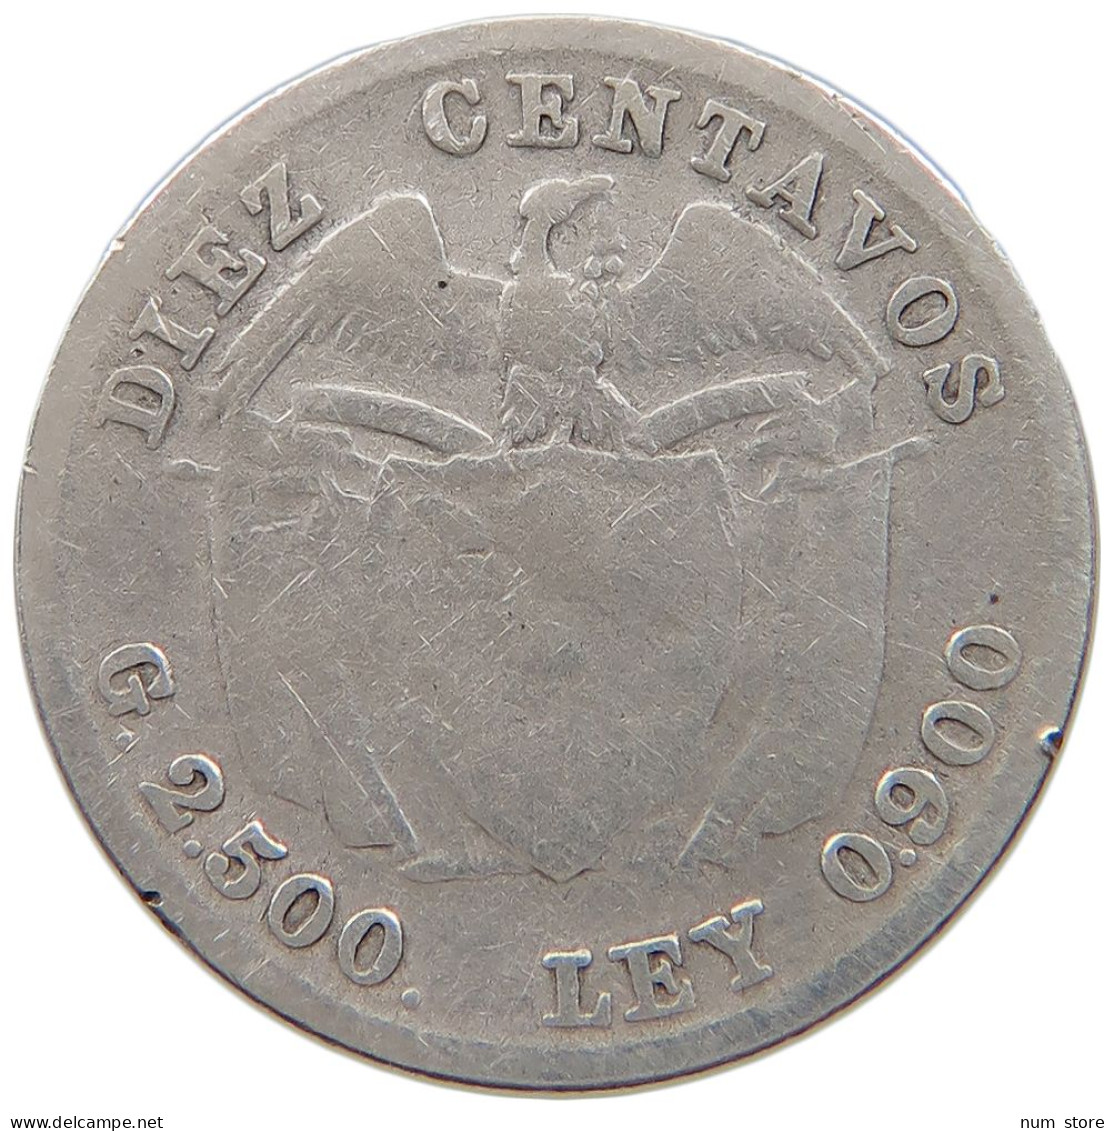 COLOMBIA 10 CENTAVOS 1911  #a052 0431 - Colombie